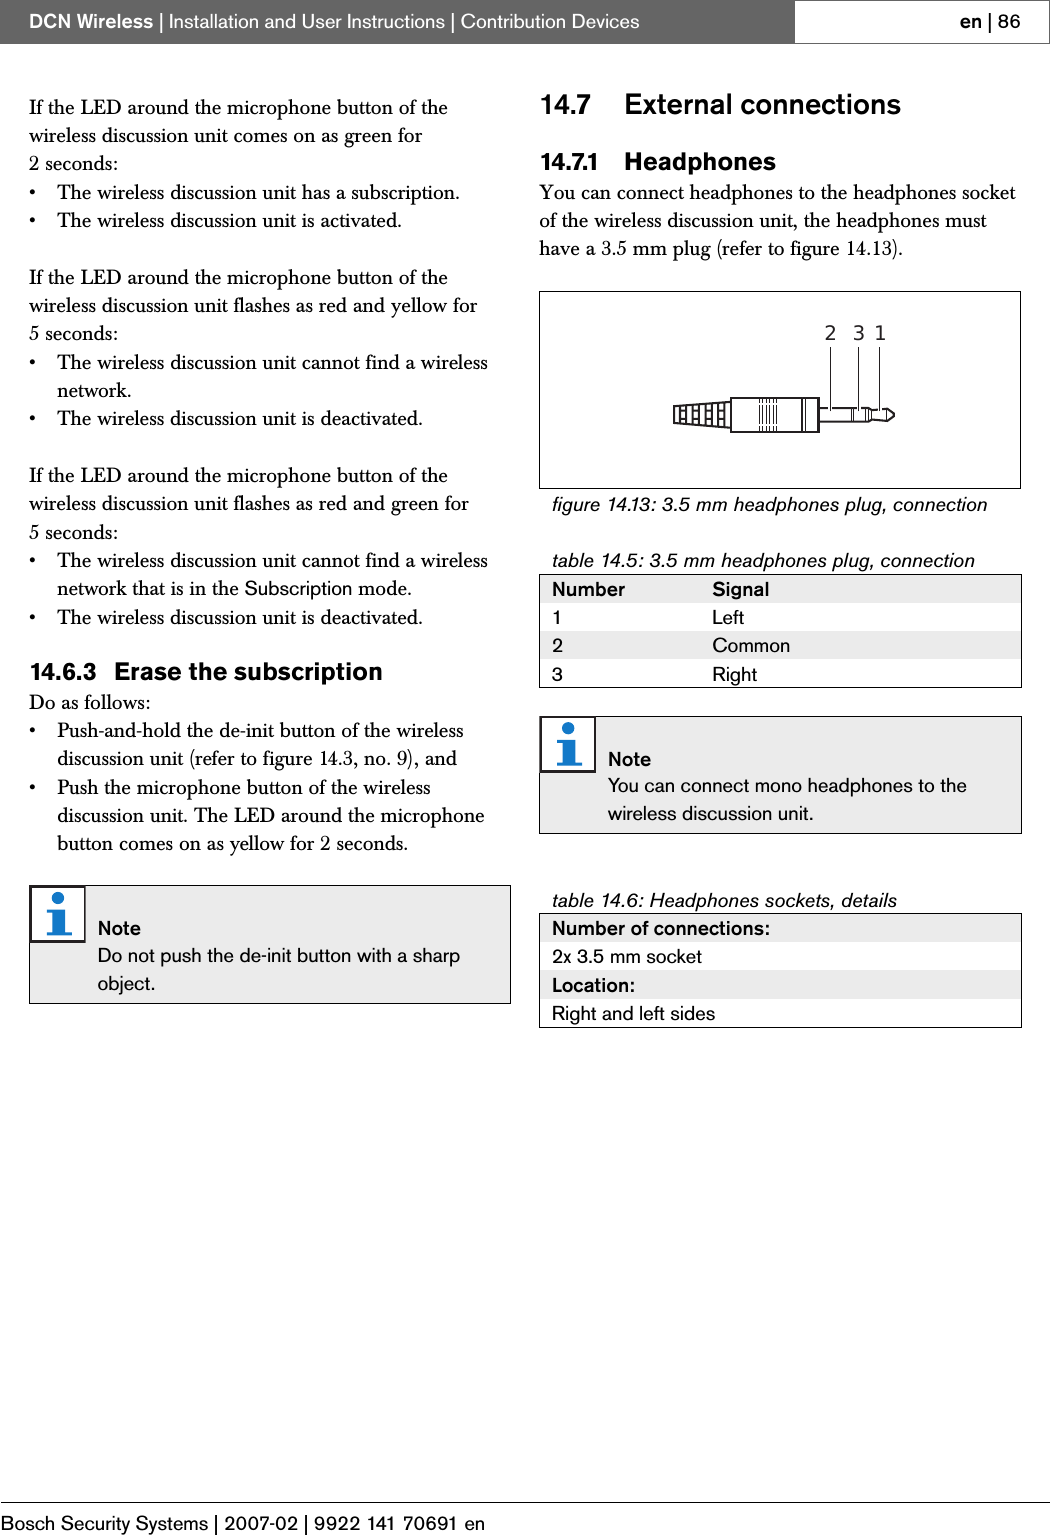 Page 57 of Bosch Security Systems DCNWAP Wireless Access Point User Manual Part 2